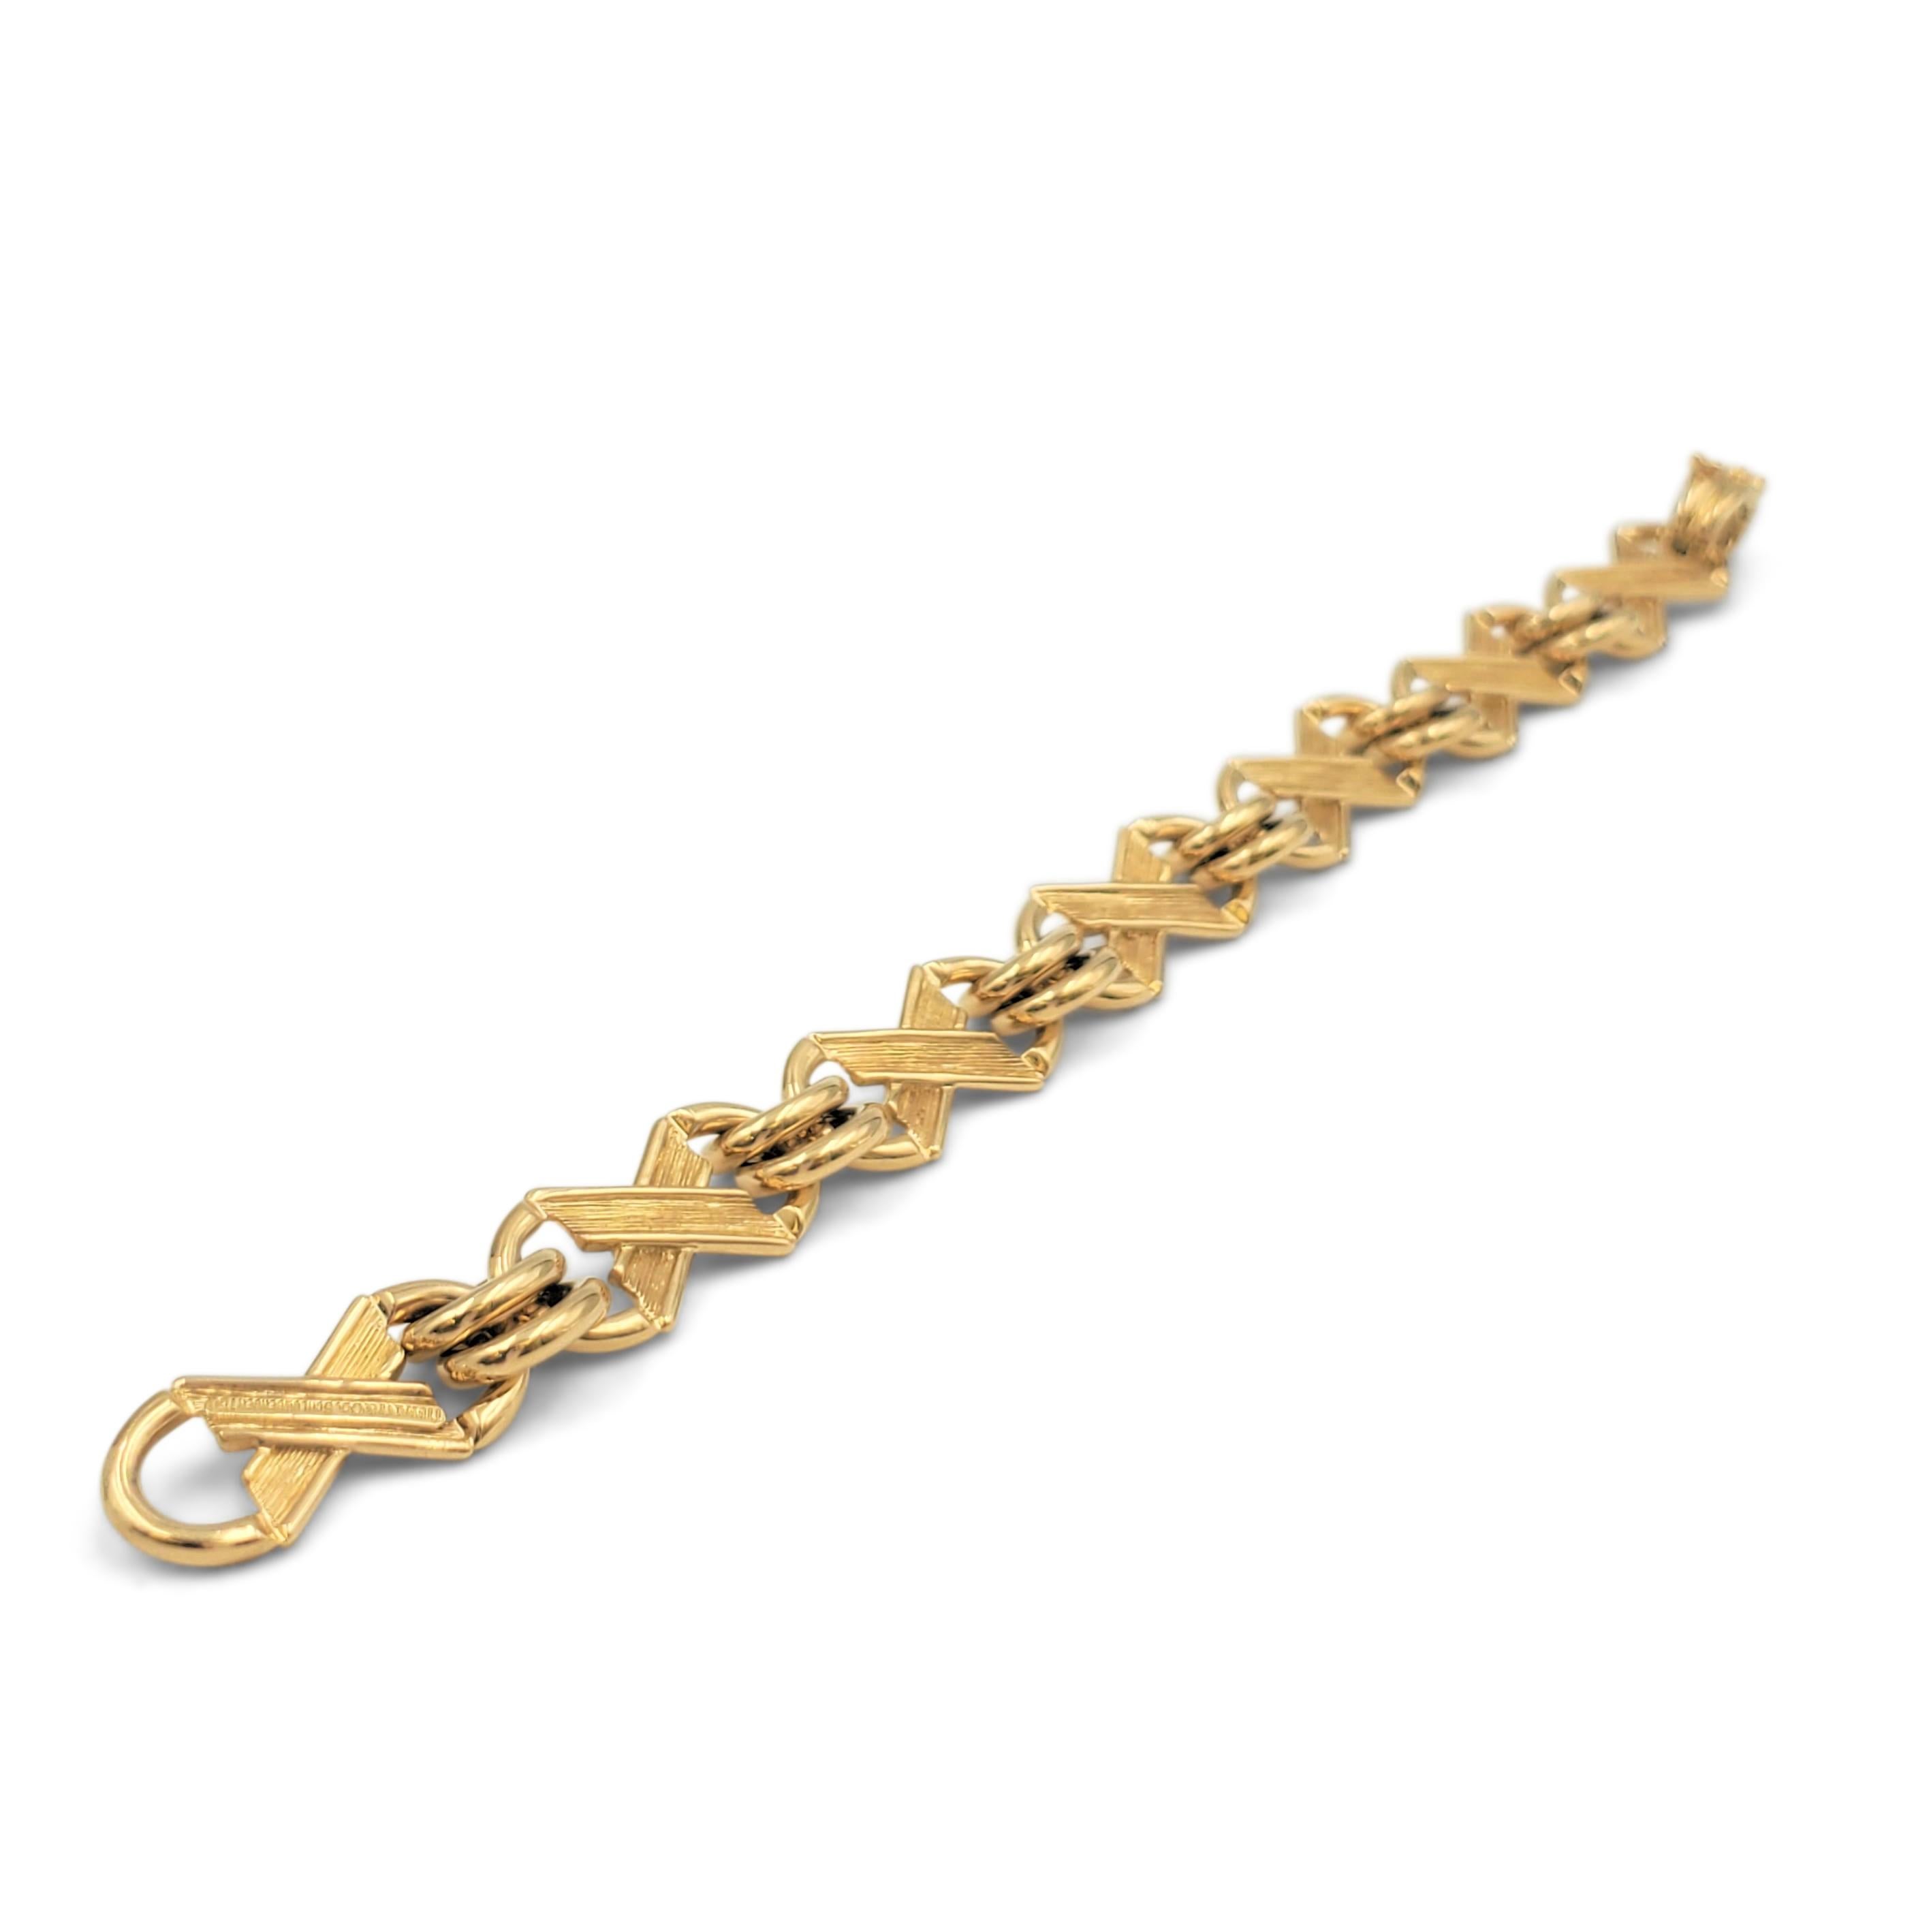 the jean schlumberger for tiffany & co. x's & o's necklace bracelet combination